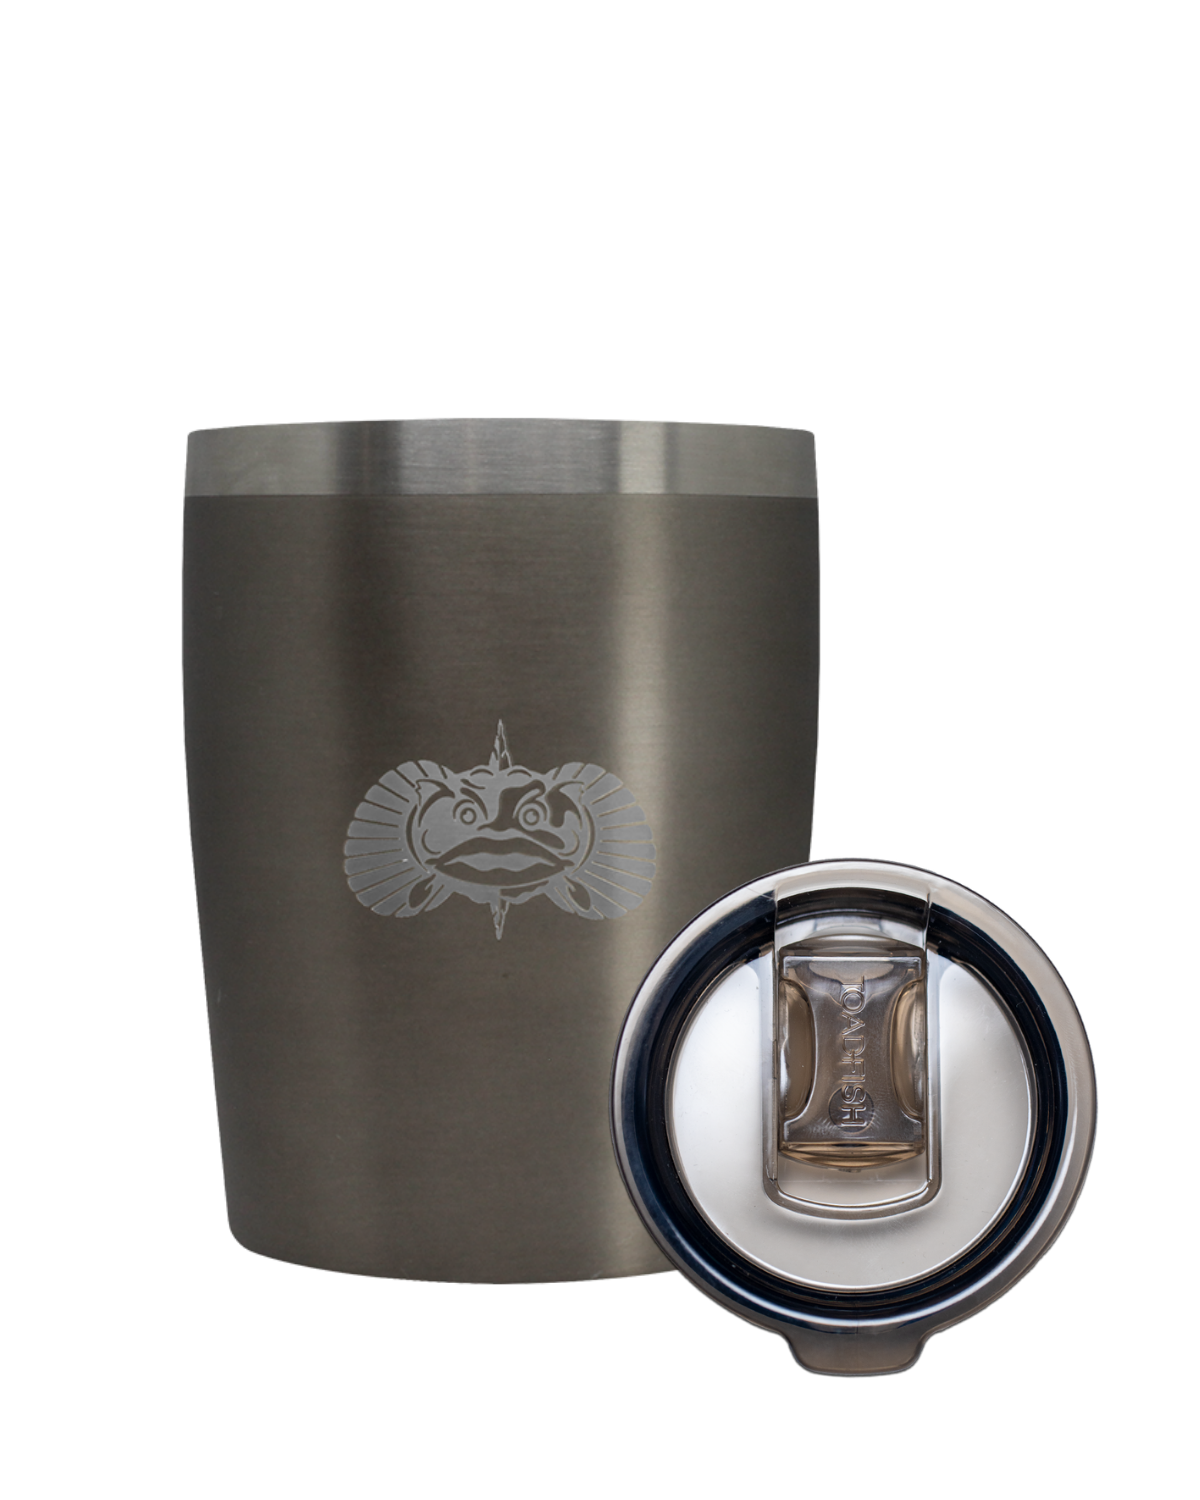 TOADFISH Toadfish Non-tipping 10oz Insulated Stainless Steel Rocks Tumbler With Easy Slide Lid